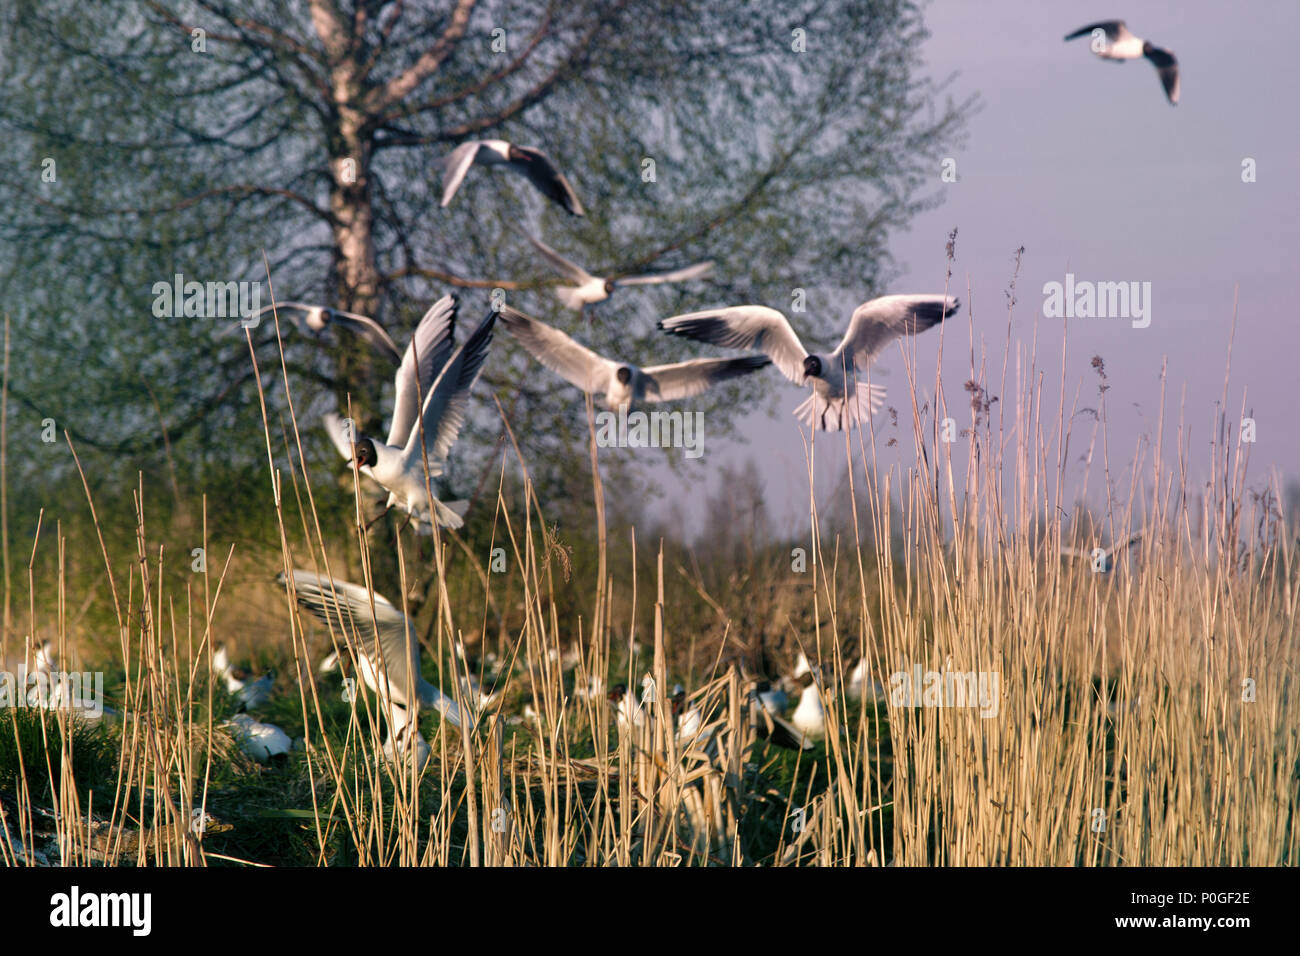 Black-headed gulls formed colony that has built nests and lay eggs. Spring revival. Restless nesting bird life Stock Photo